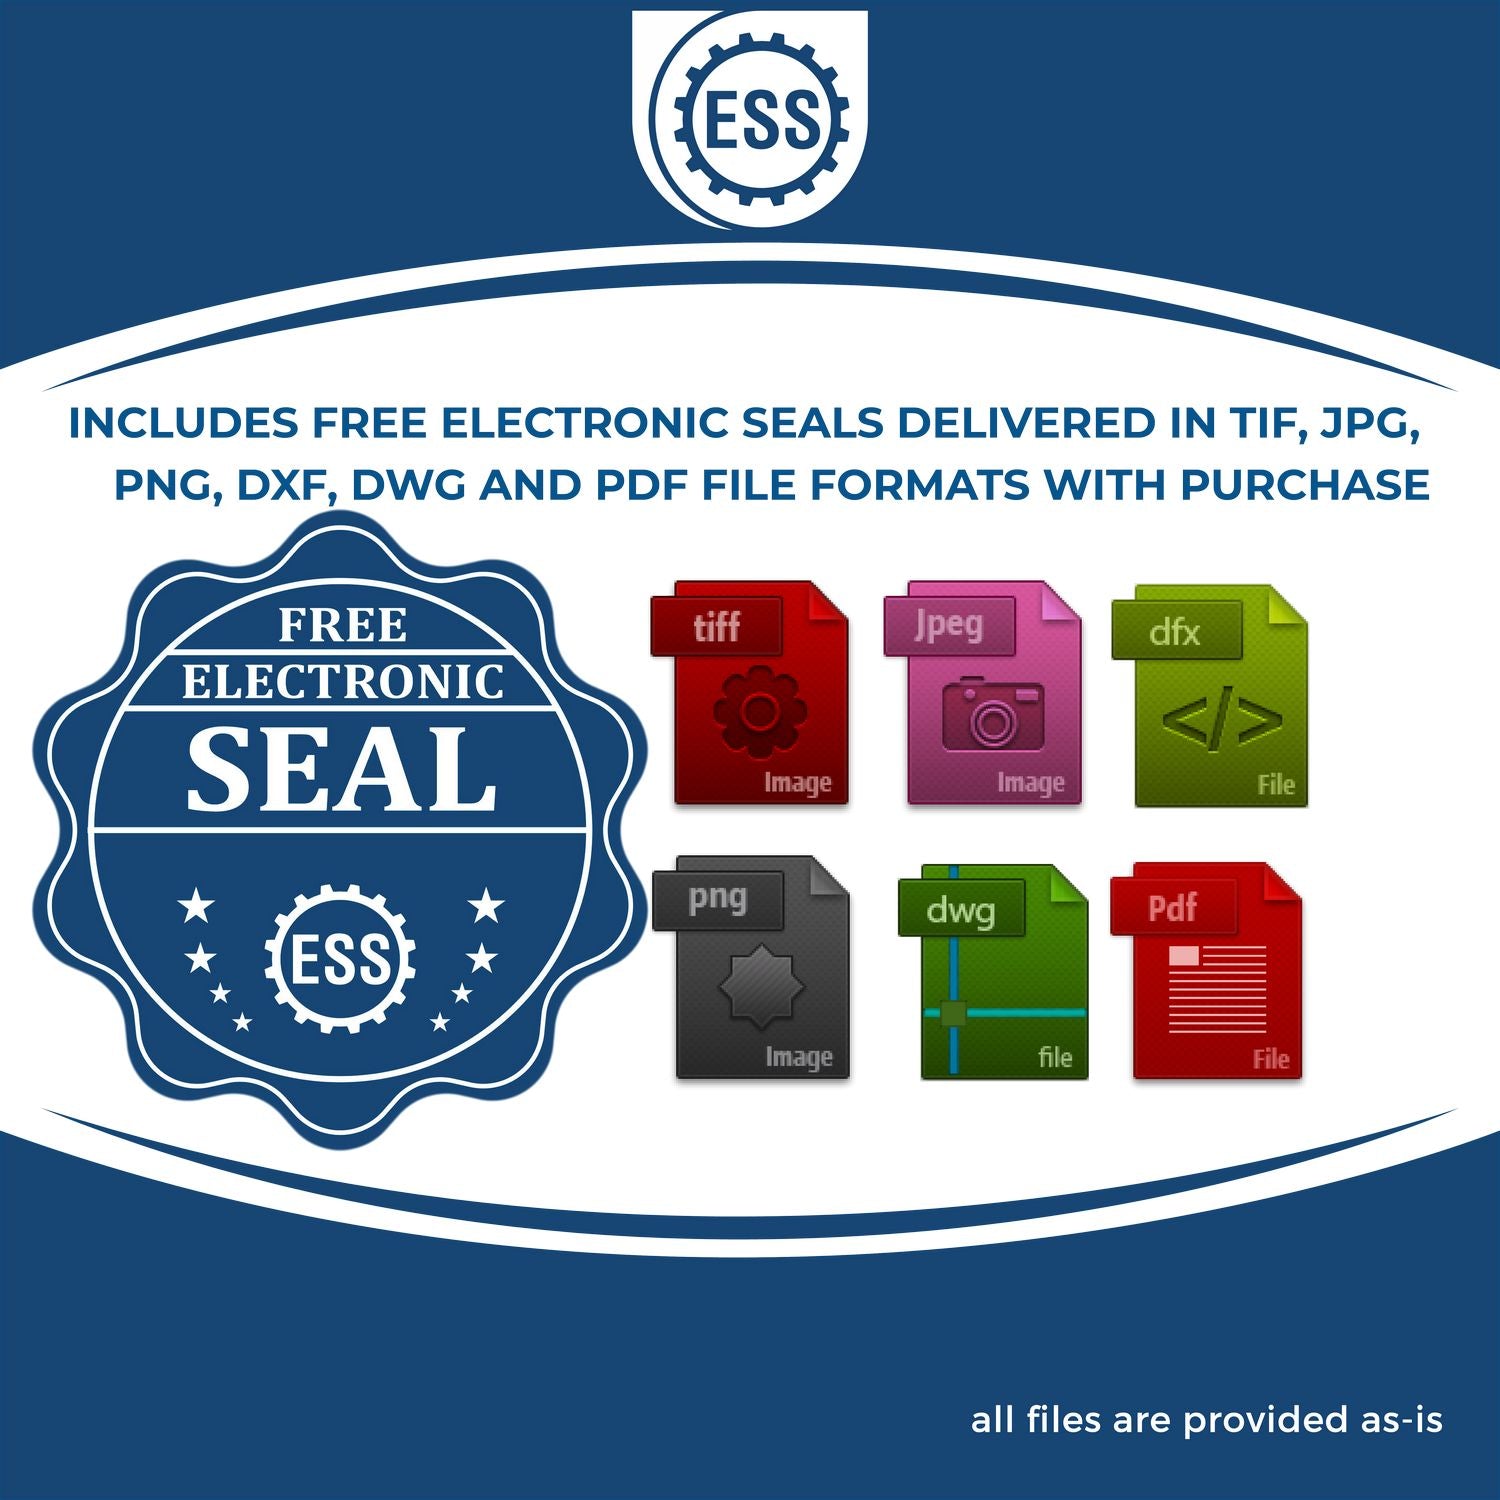 An infographic for the free electronic seal for the Heavy Duty Cast Iron Wisconsin Engineer Seal Embosser illustrating the different file type icons such as DXF, DWG, TIF, JPG and PNG.